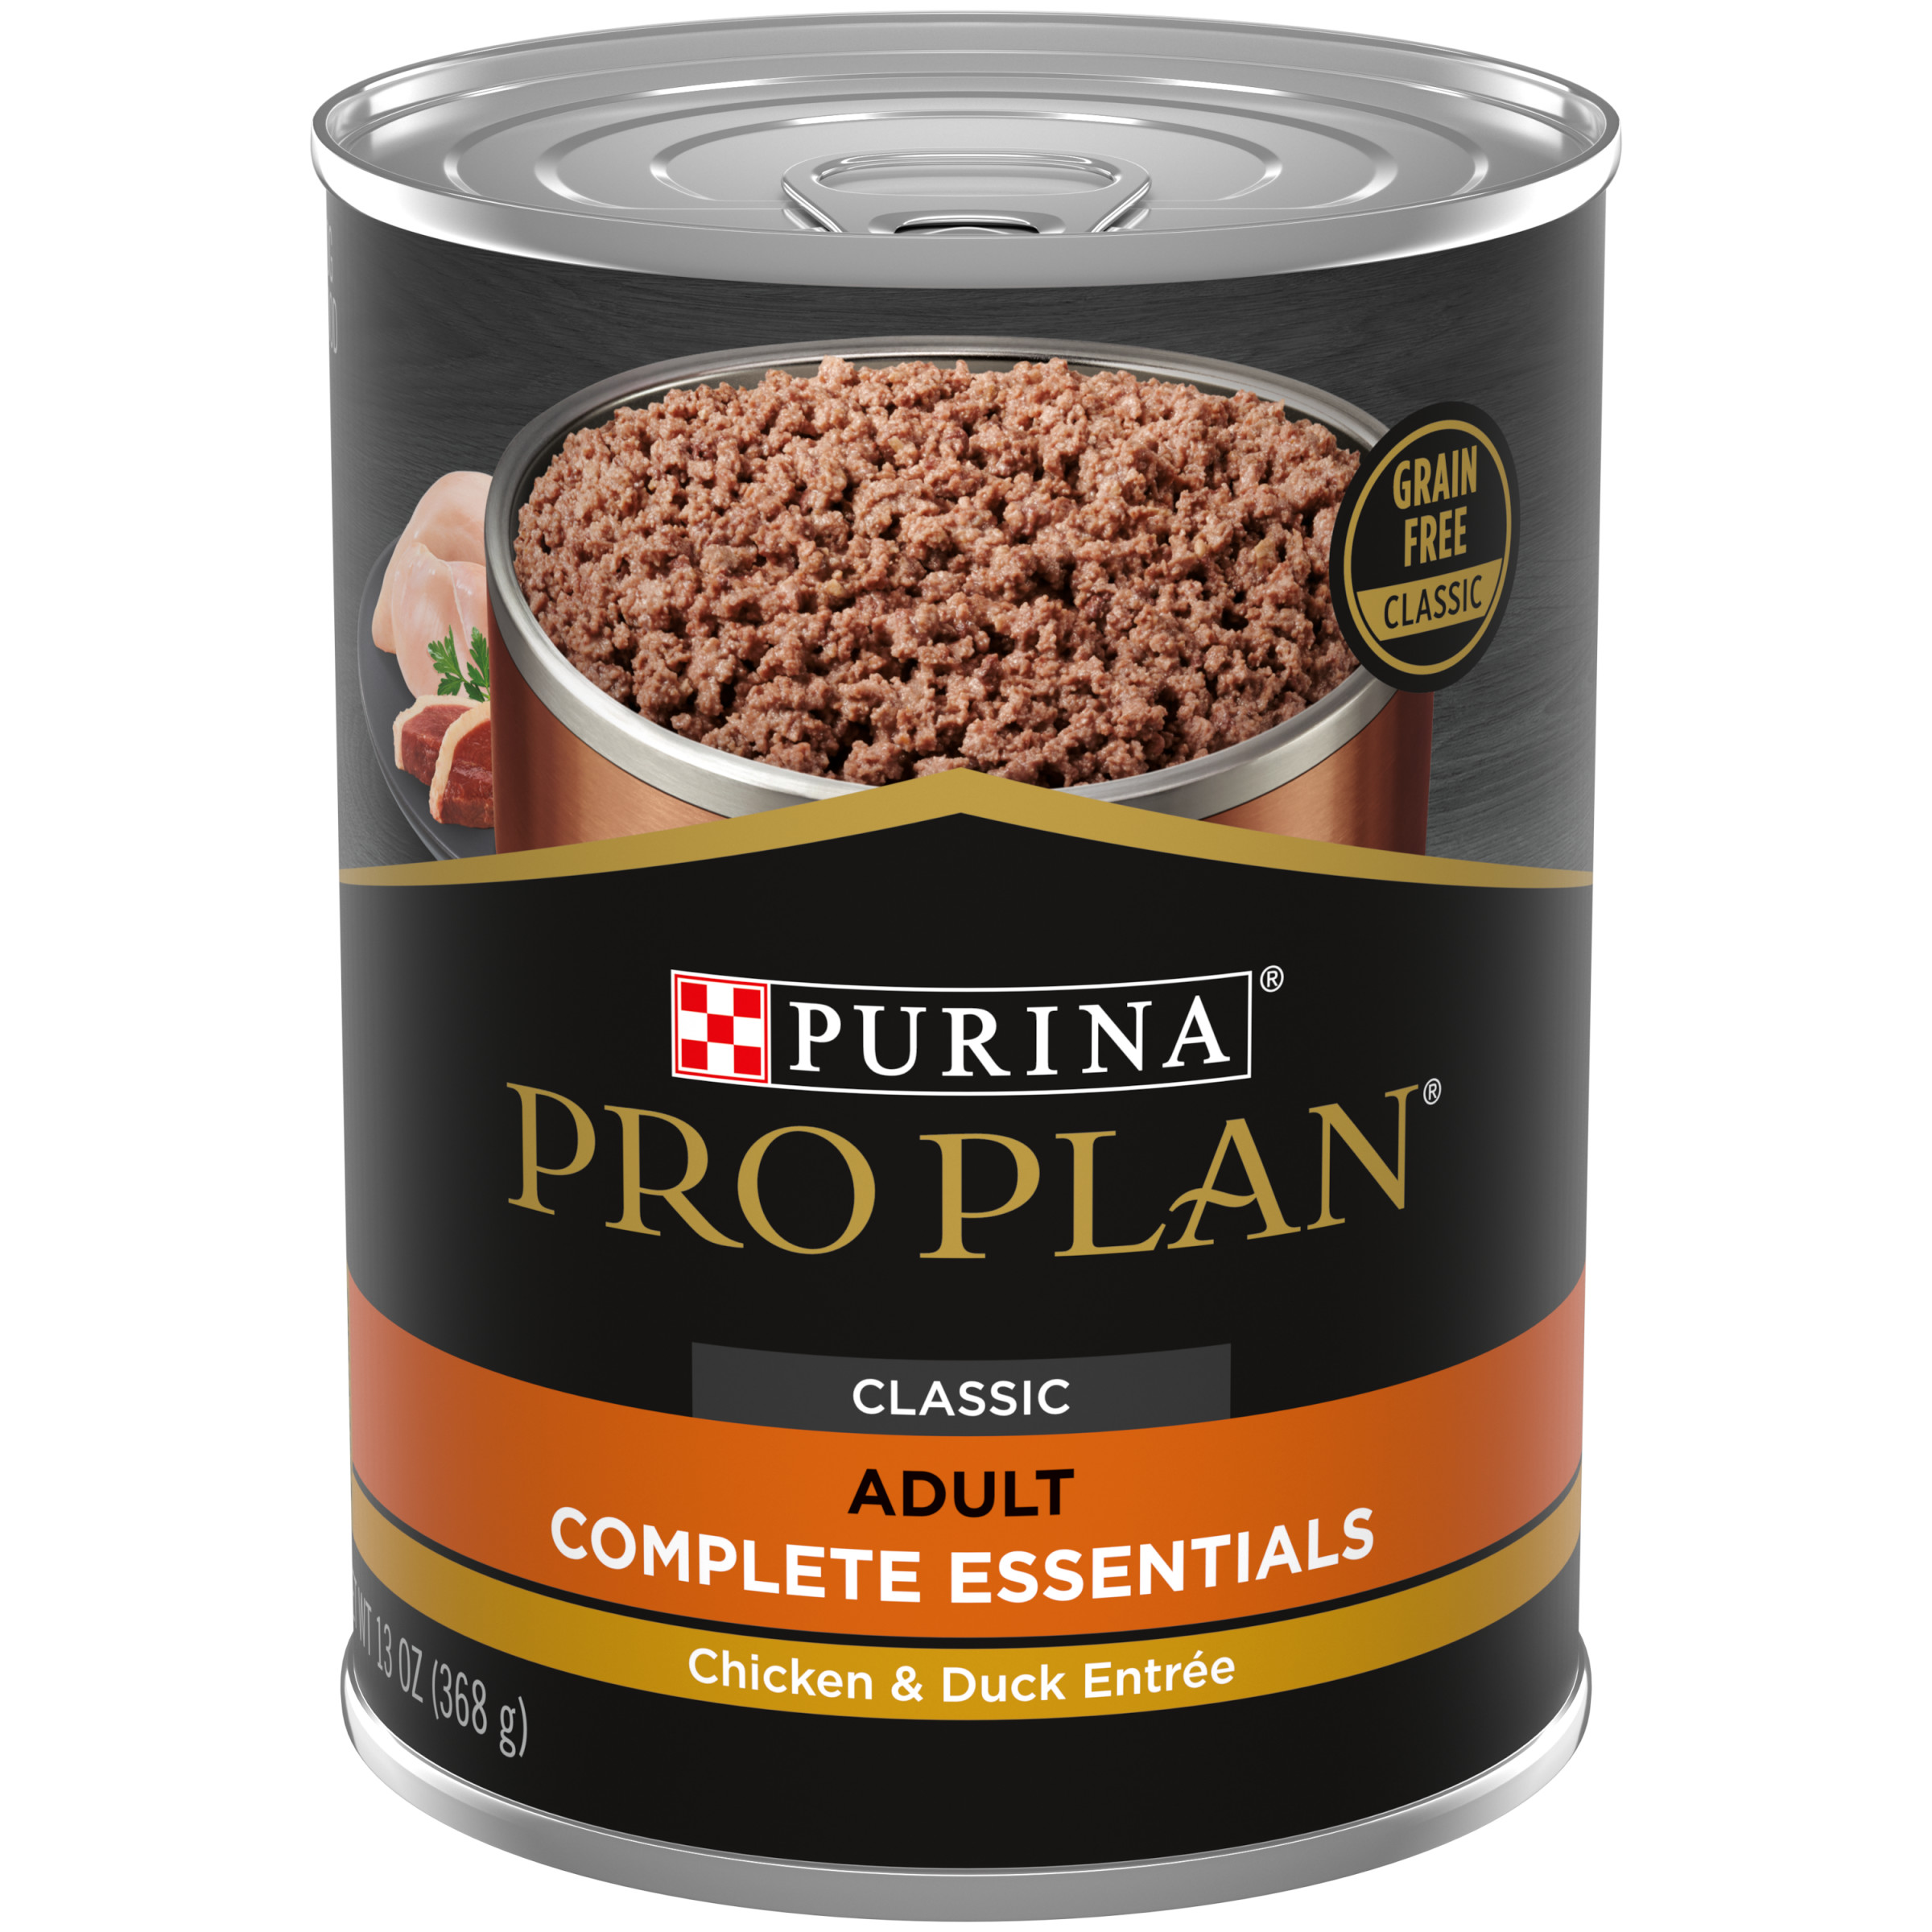 (12 Pack) Purina Pro Plan Grain Free, High Protein Wet Dog Food, COMPLETE ESSENTIALS Classic Chicken & Duck Entree, 13 oz. Cans - image 1 of 10